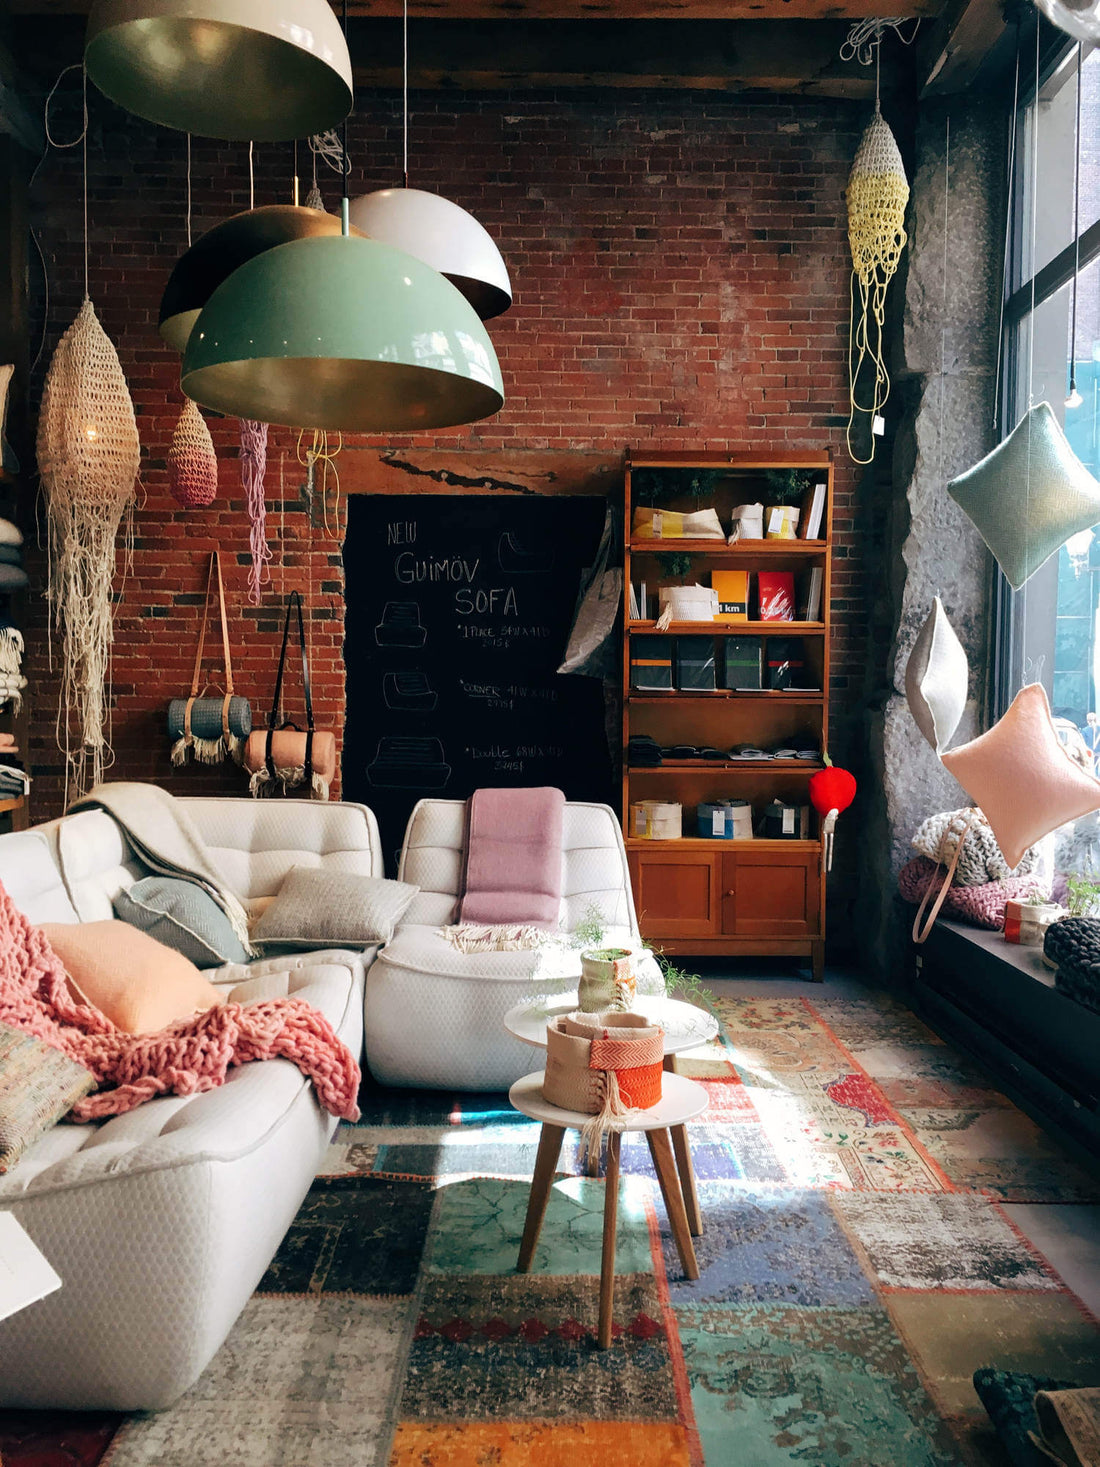 Drowning in clutter? Here's what to do